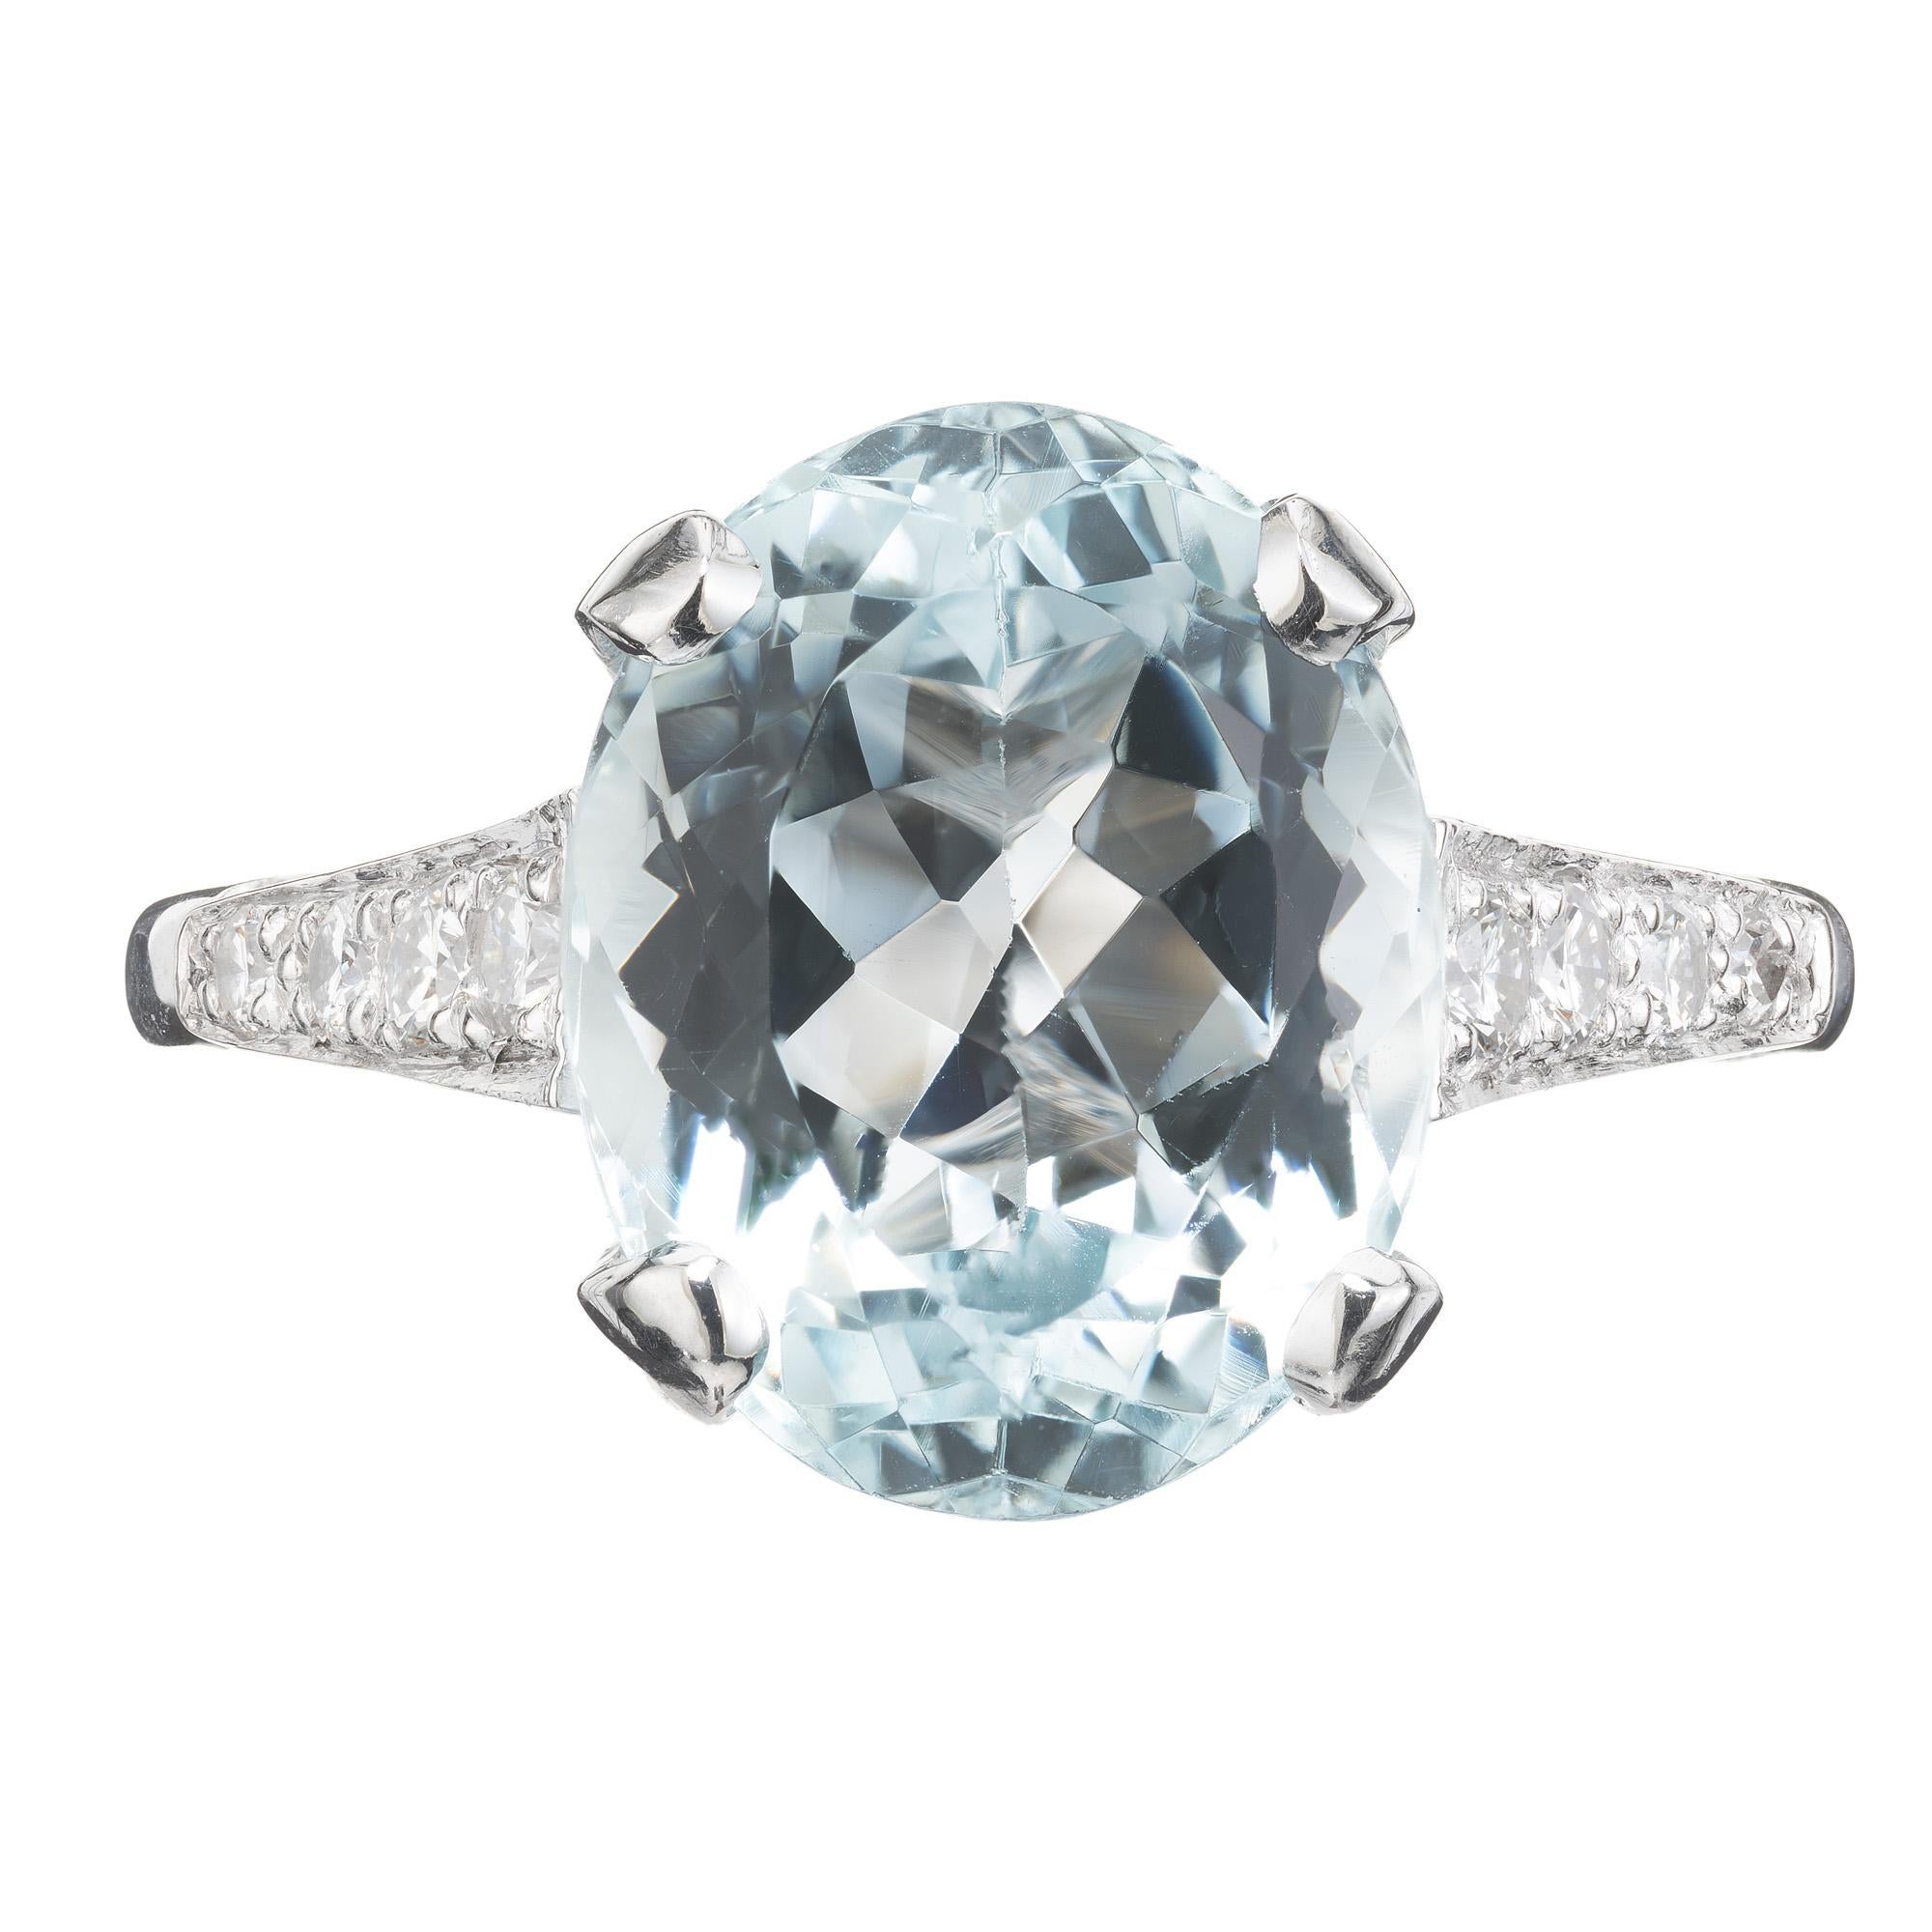 Fantastic 1960's very bright soft blue natural aquamarine and diamond engagement ring. 4.60cts oval aqua mounted in a platinum setting, accented with 4 round brilliant cut diamonds along each shoulder. The ring is classic and elegant, suitable for